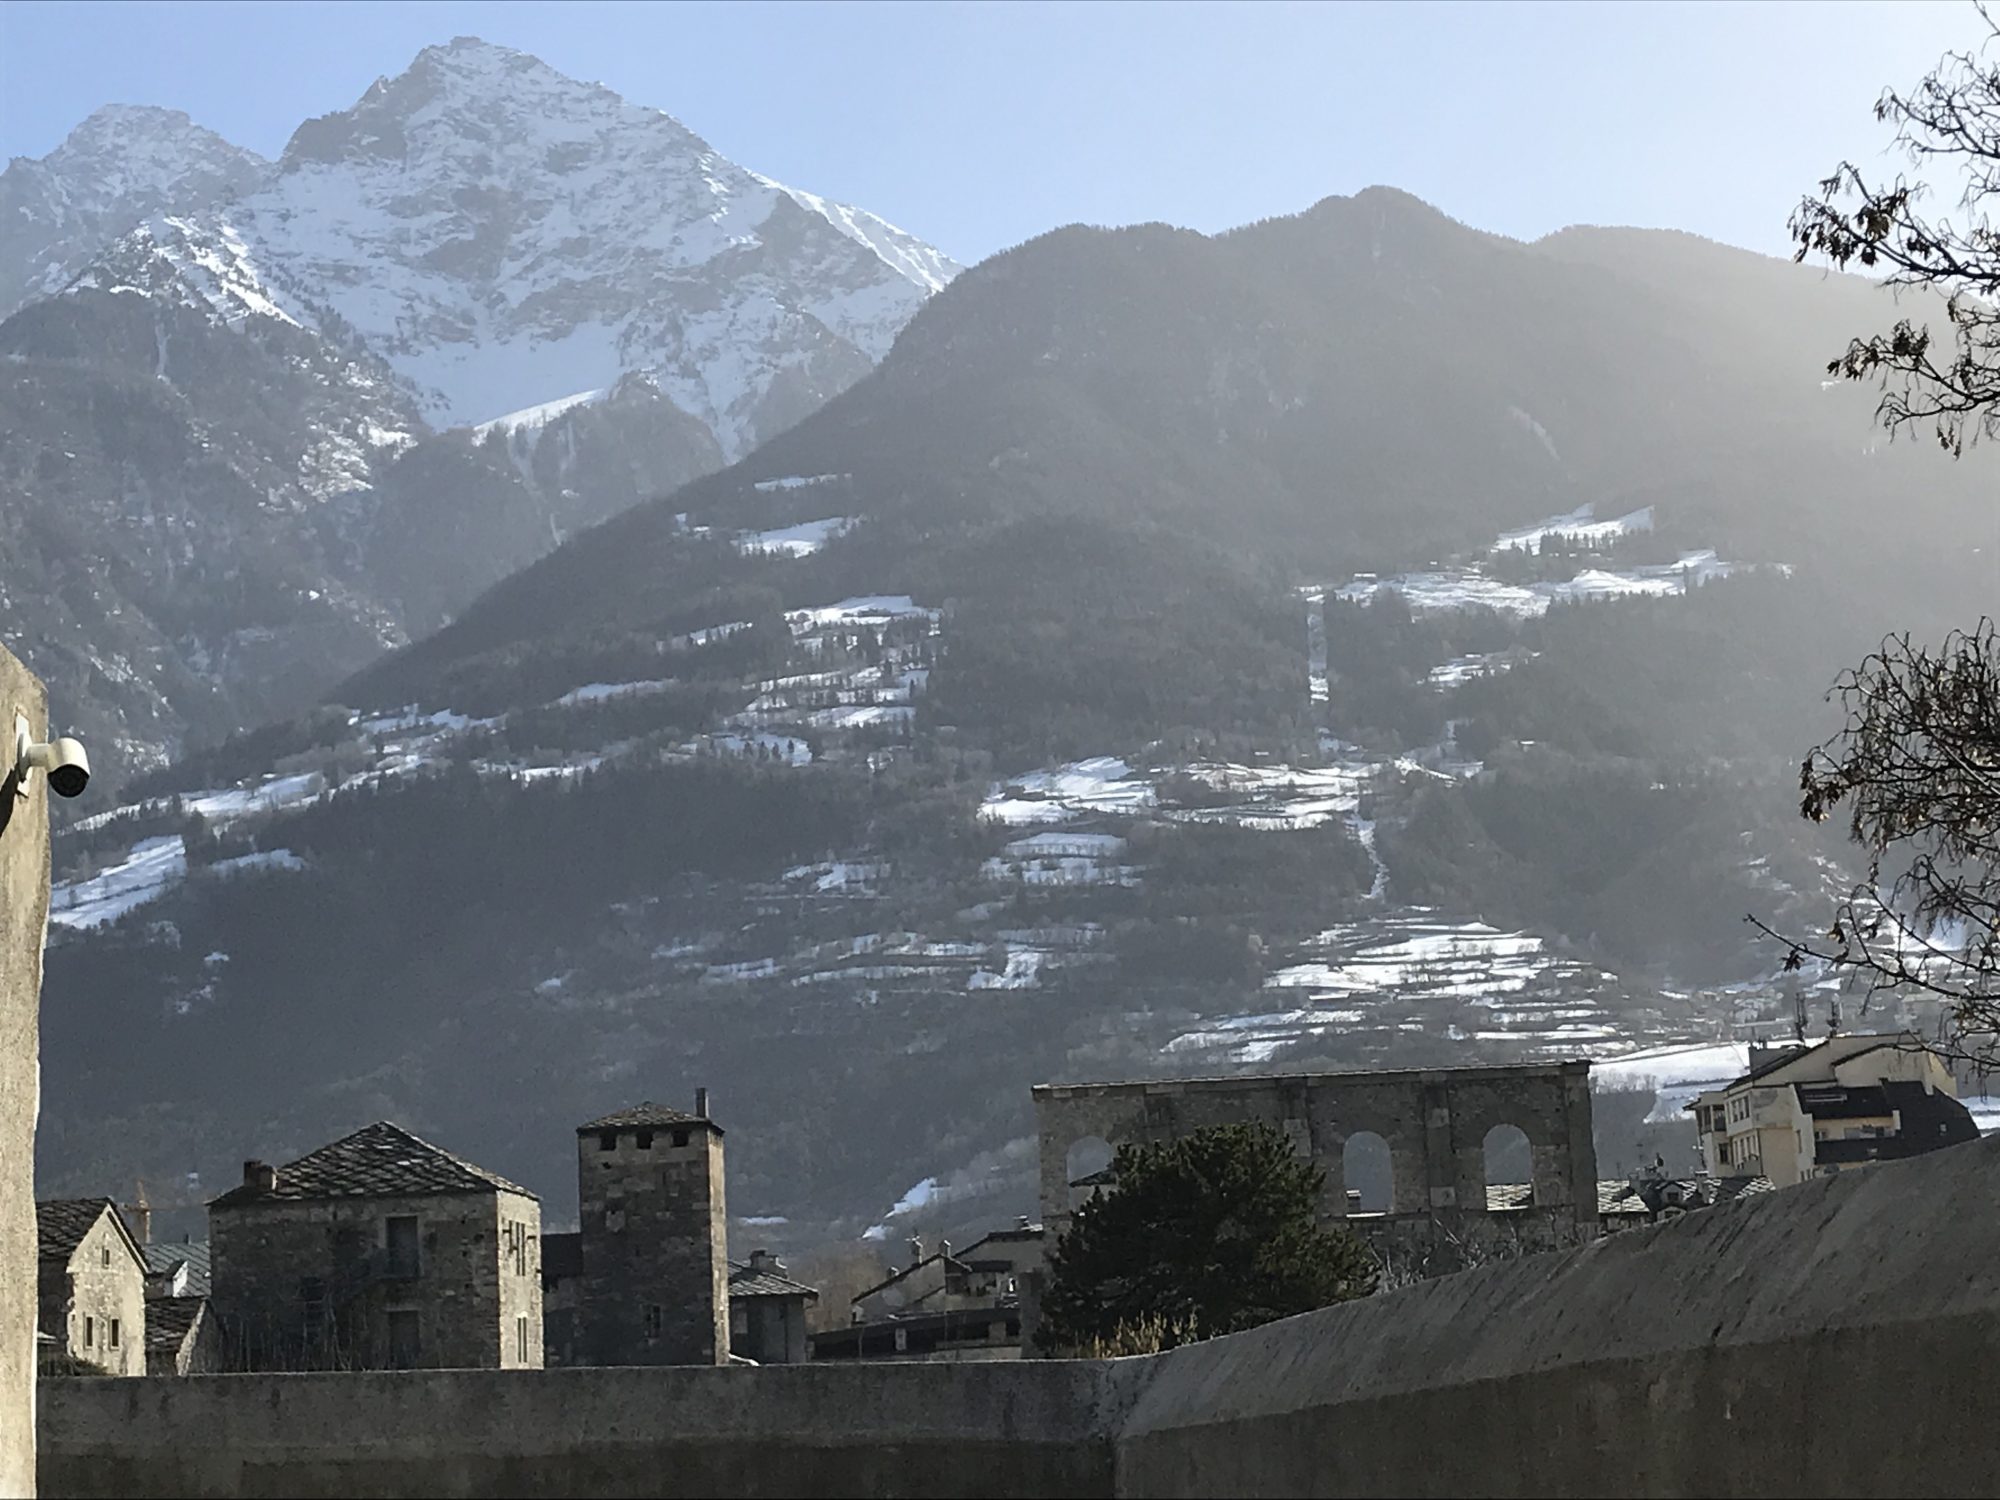 Aosta - the Rome of the Alps - Aosta is the second city in Italy with the most Roman ruins. Photo: The-Ski-Guru. The Half Term Family Ski Holiday that did not result as planned.